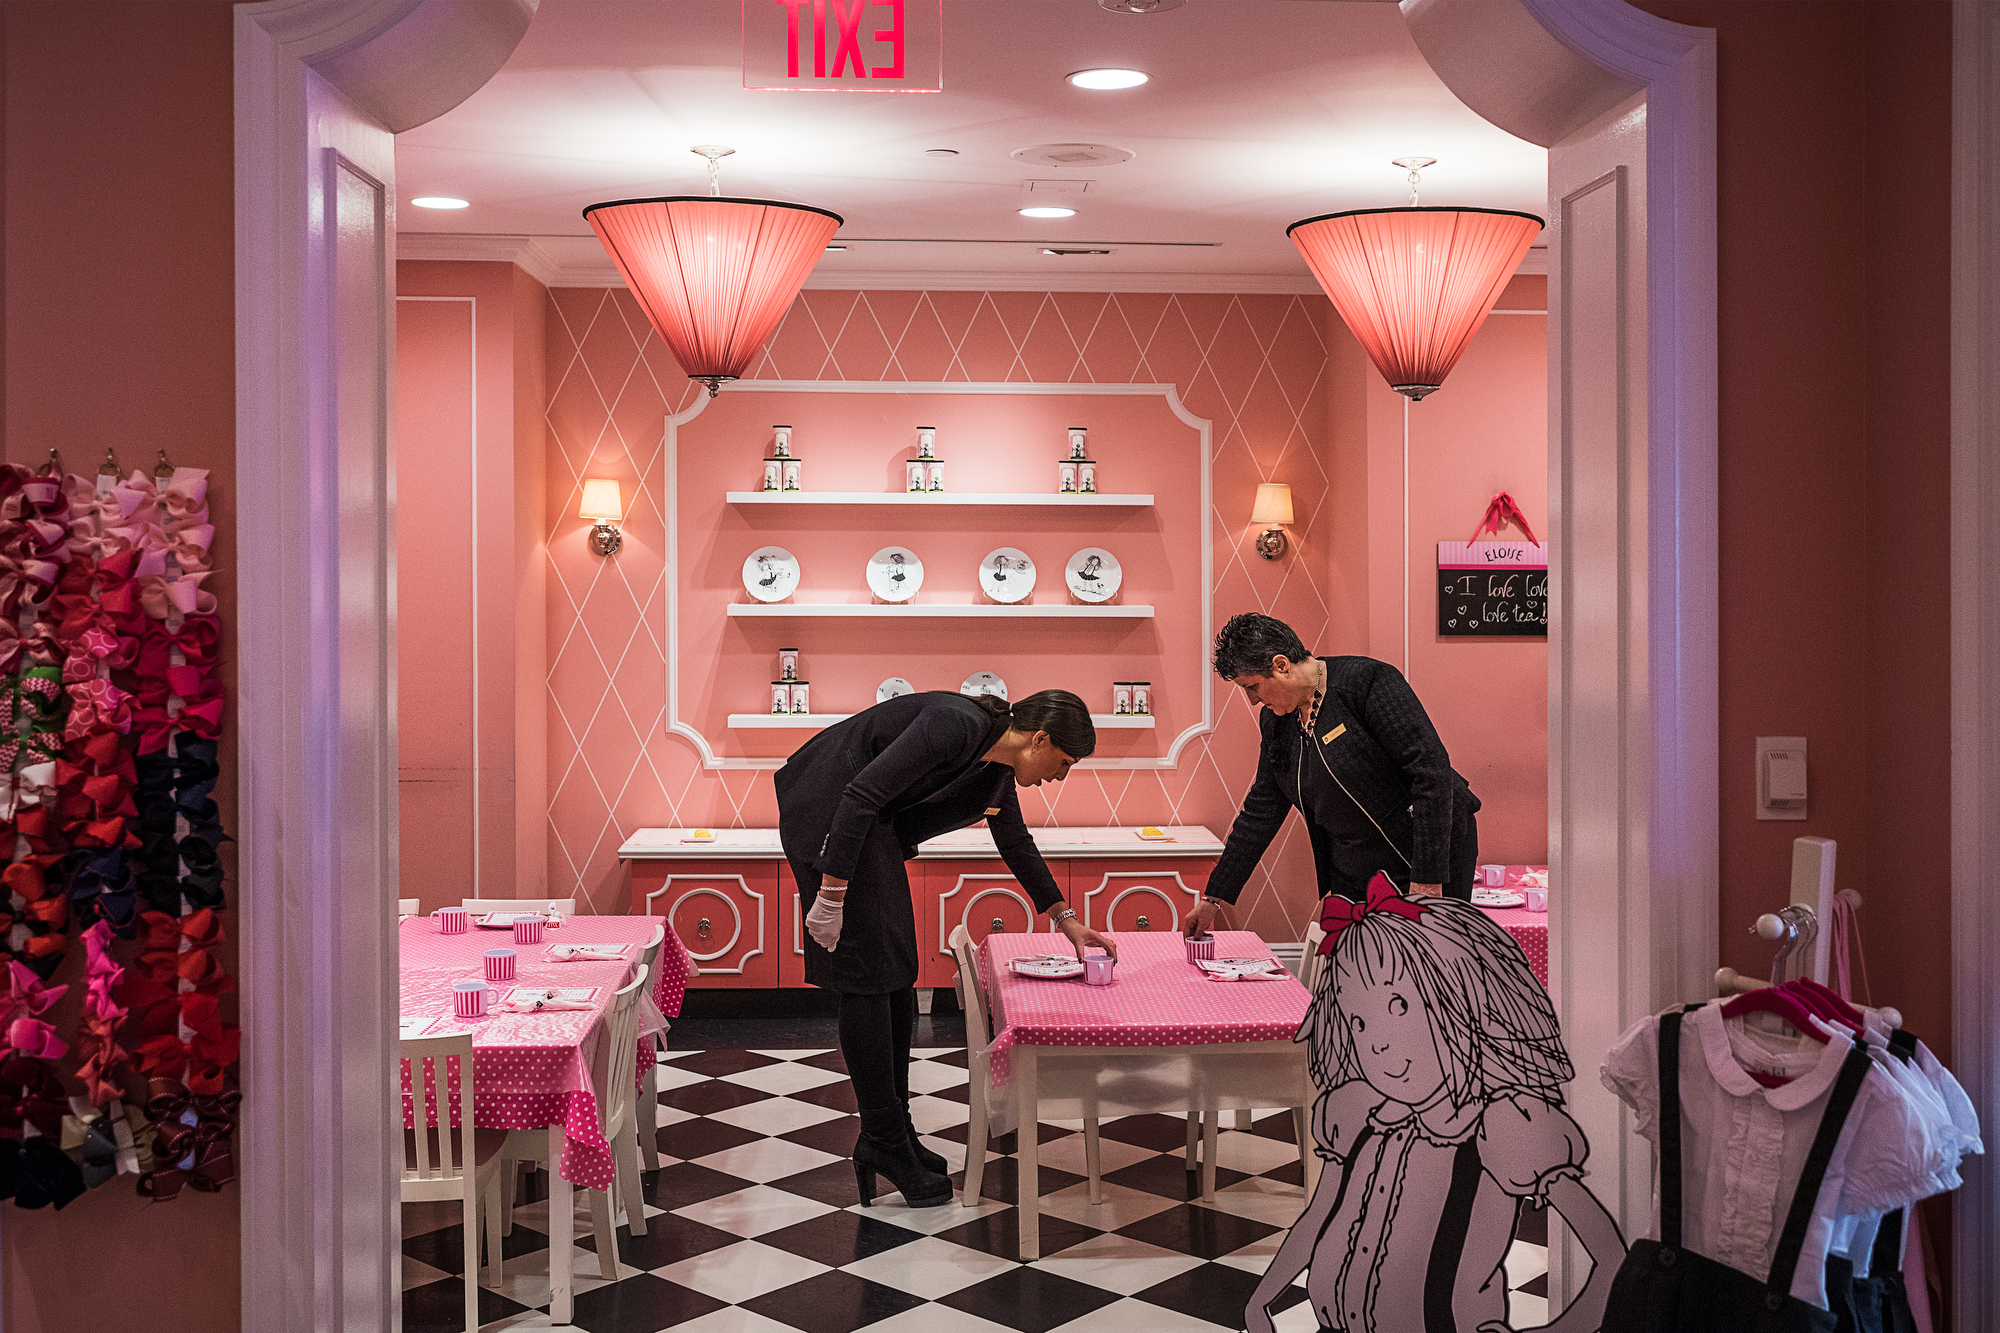     Aaron Vincent Elkaim, Laurence Ledanois, a staff member of 19 years (right) arranges tables with Jessica Azoulai for tea time at the Eloise Boutique at The Plaza, a Fairmont managed hotel, in New York., 2016. Courtesy of NAMARA represents.

